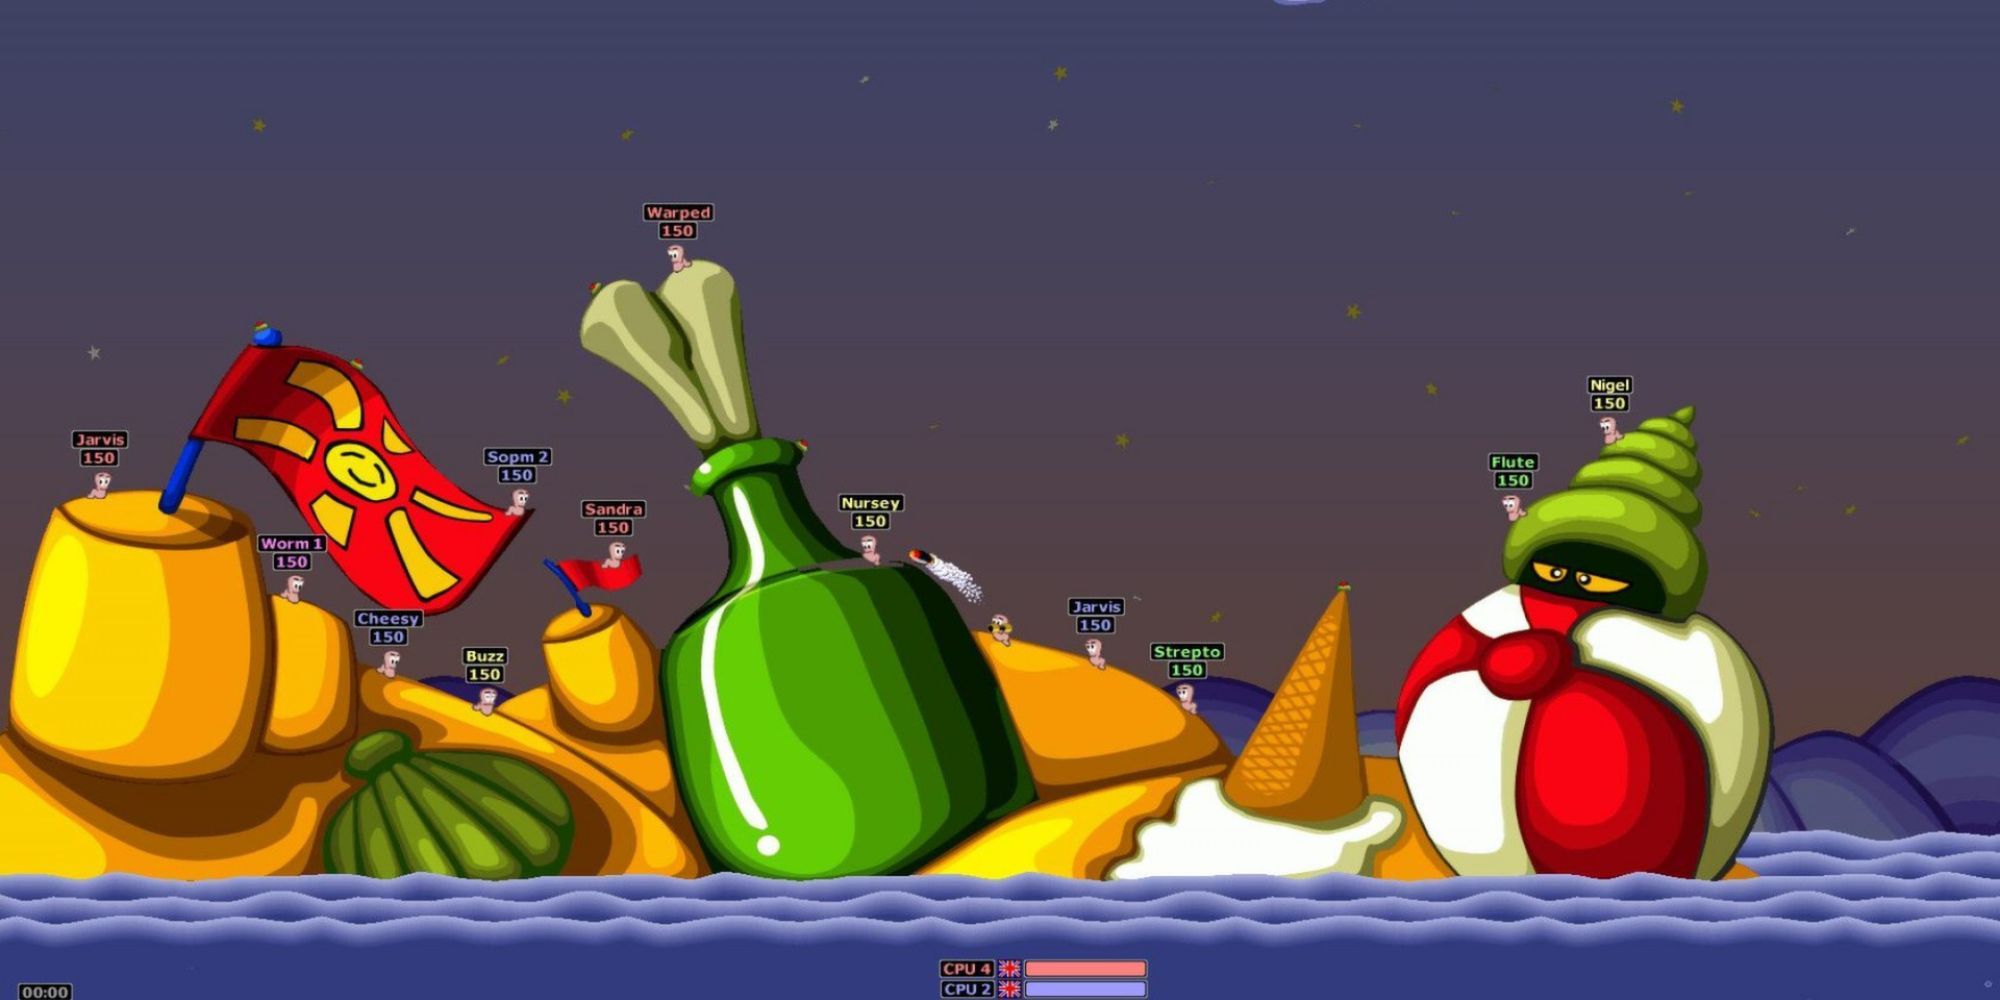 Worms battling on sandcastles and ice cream in Worms Armageddon